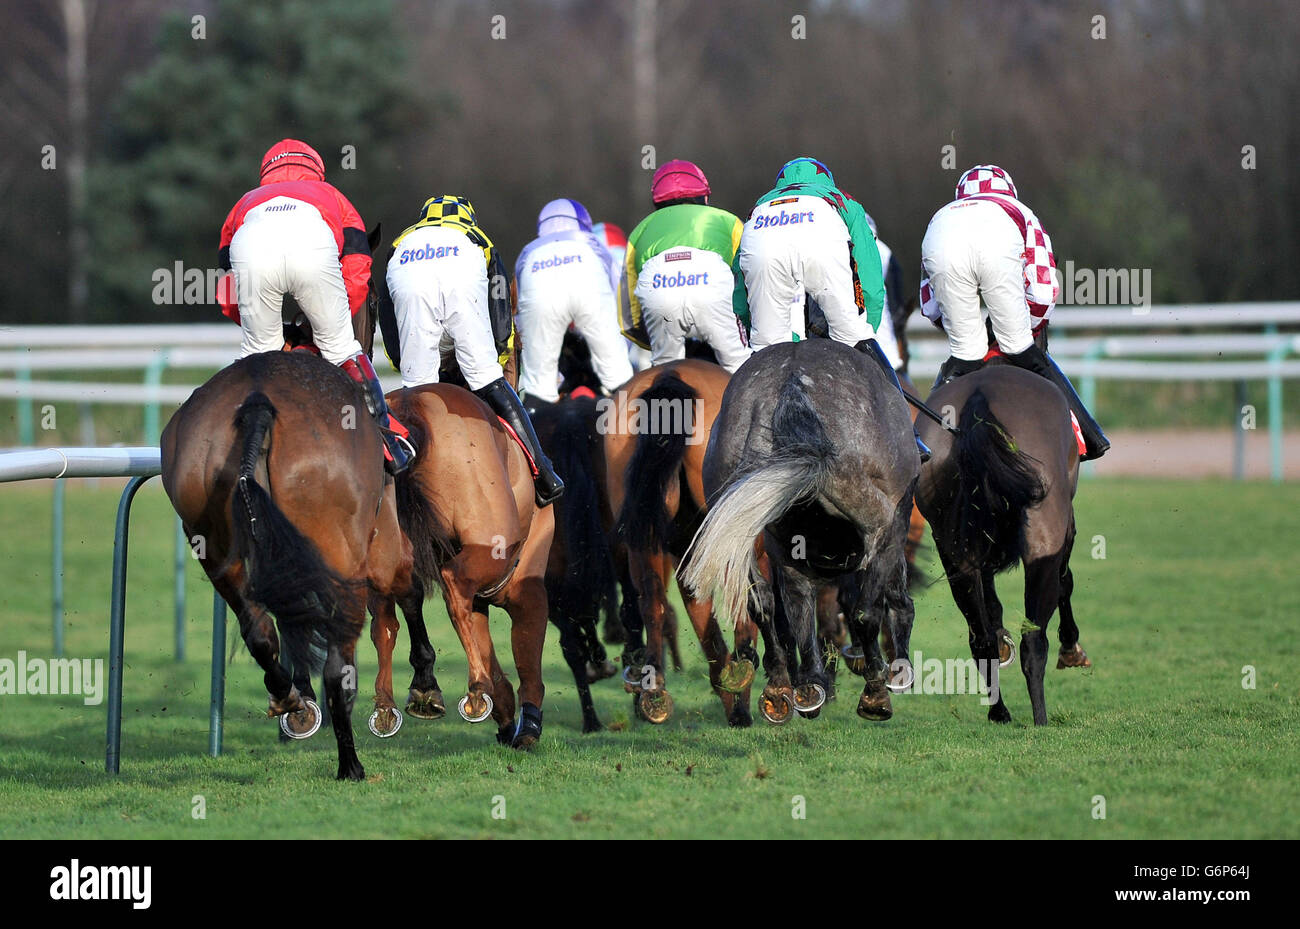 Runners and Riders during The Your Favourite Pool Bets At totepool.com Novices' Hurdle at Southwell Racecourse, Southwell. Stock Photo